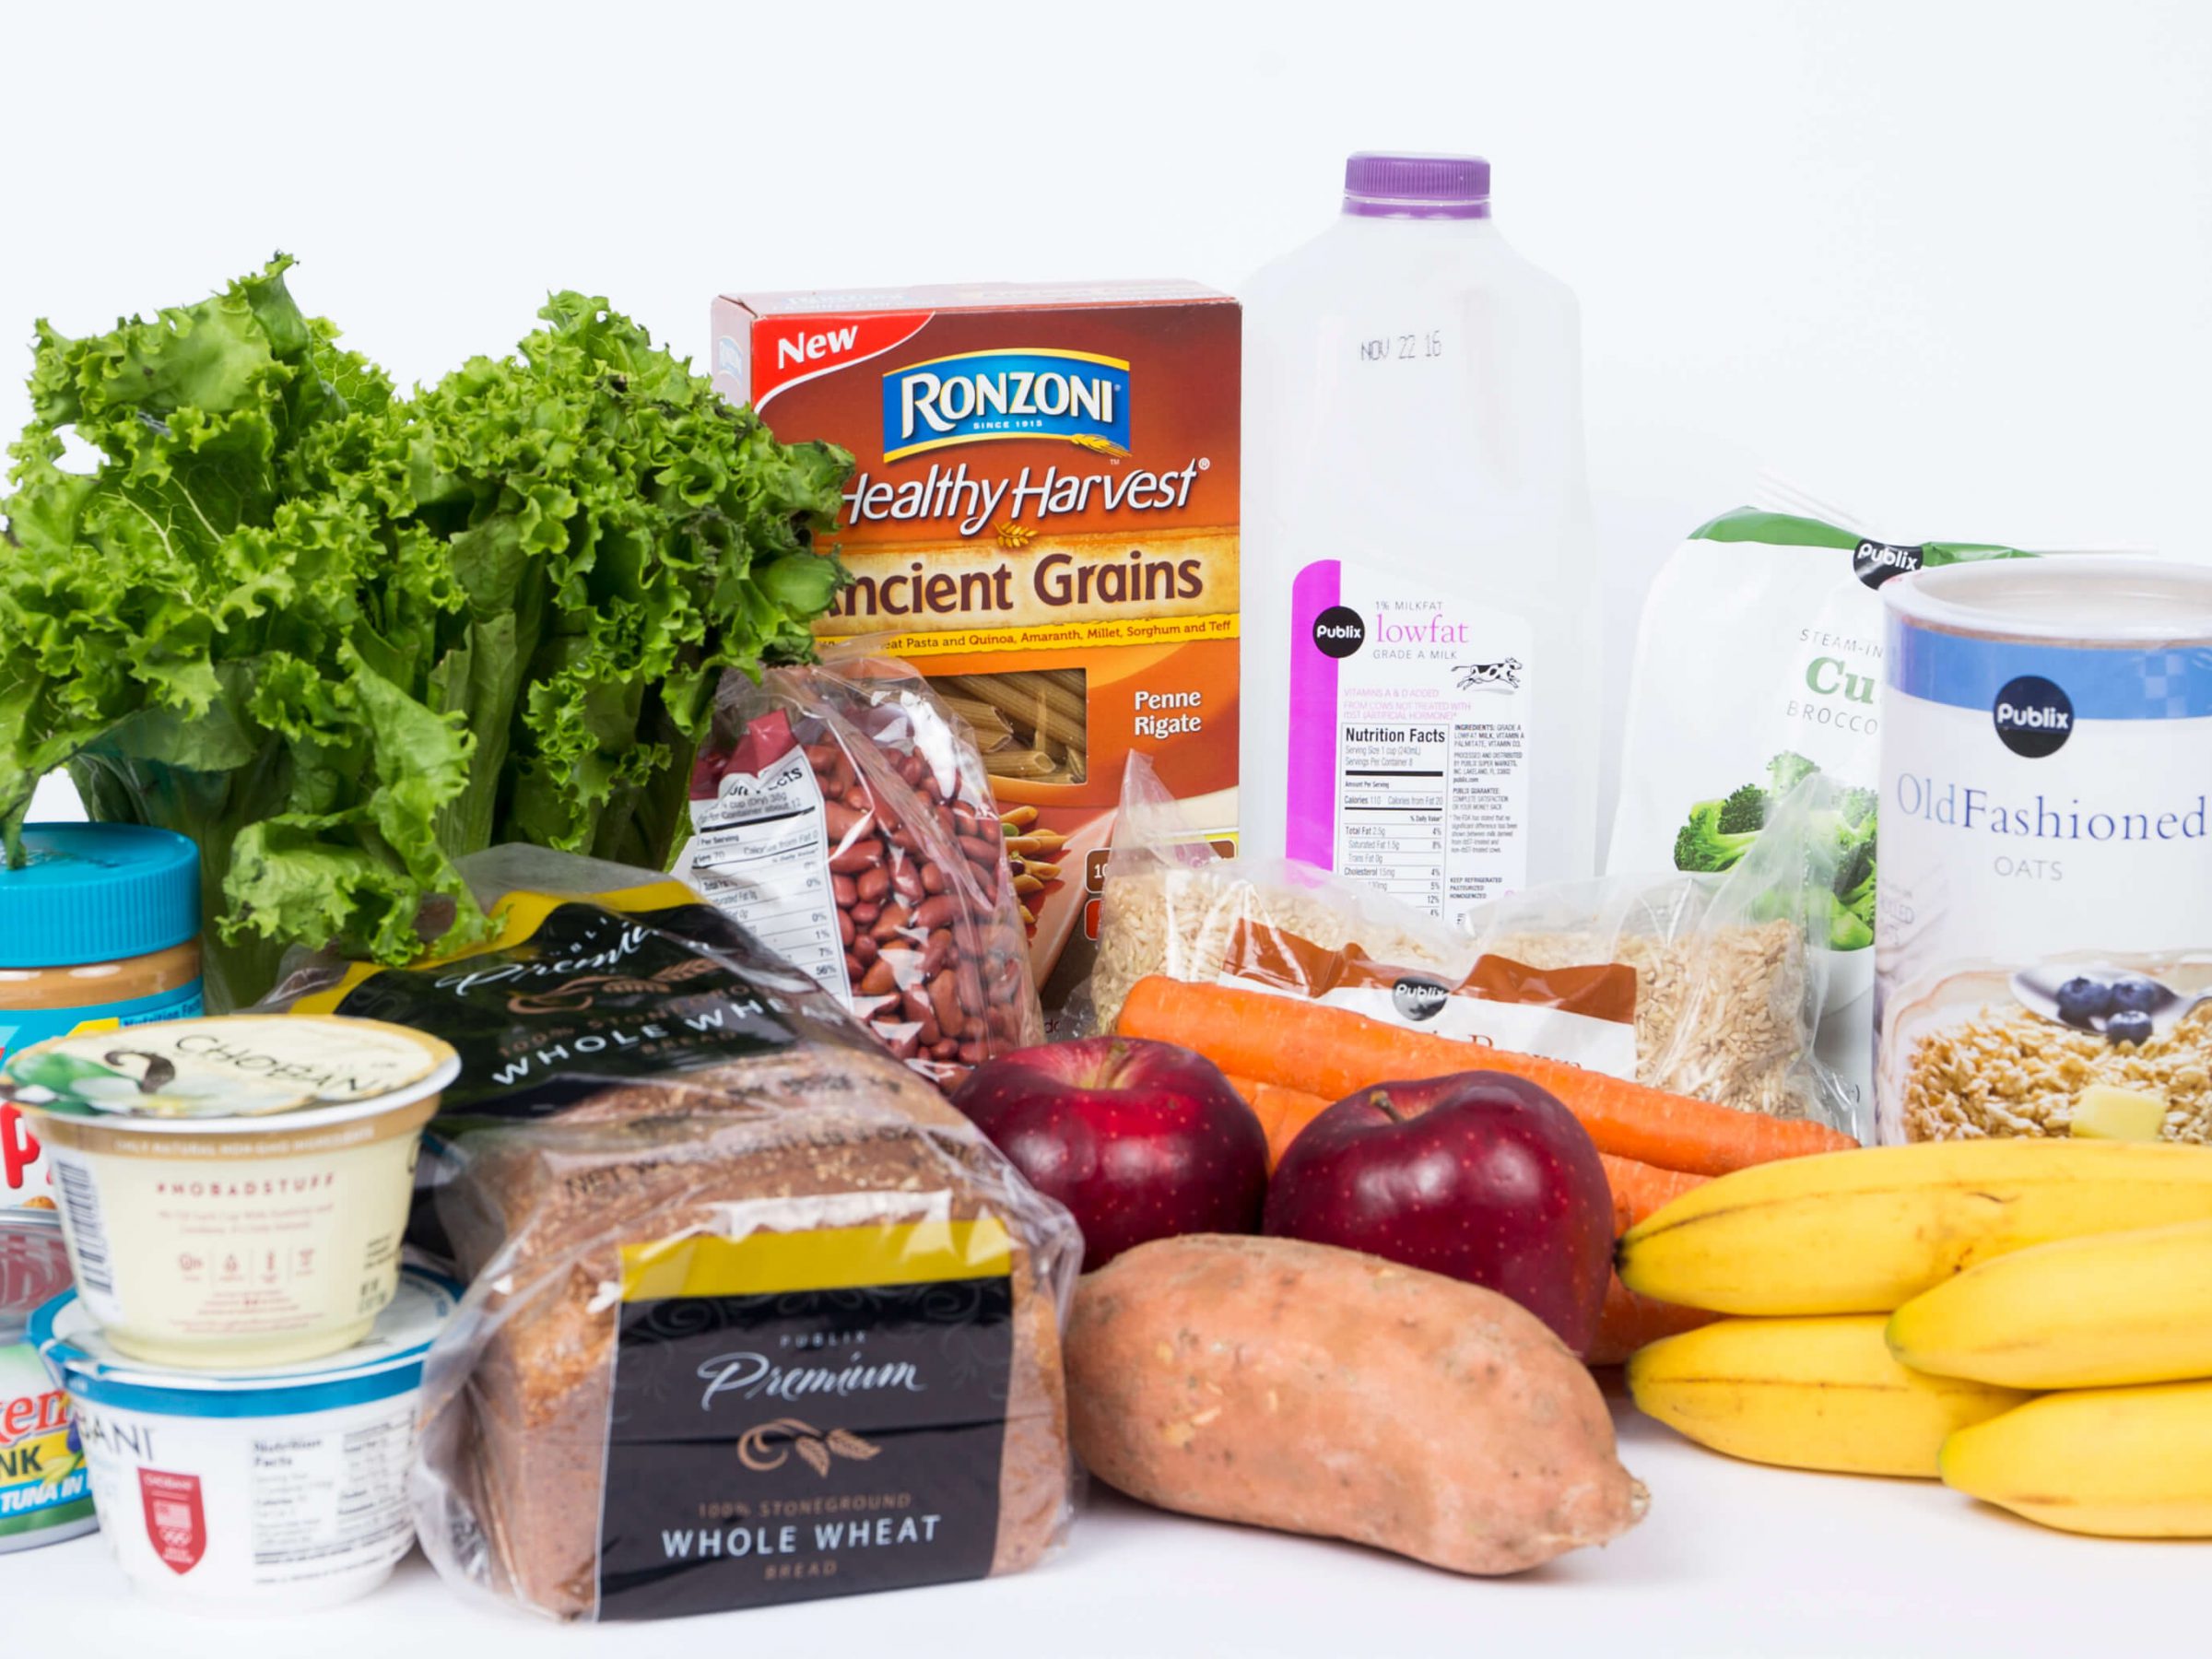 Consider these healthy options when grocery shopping